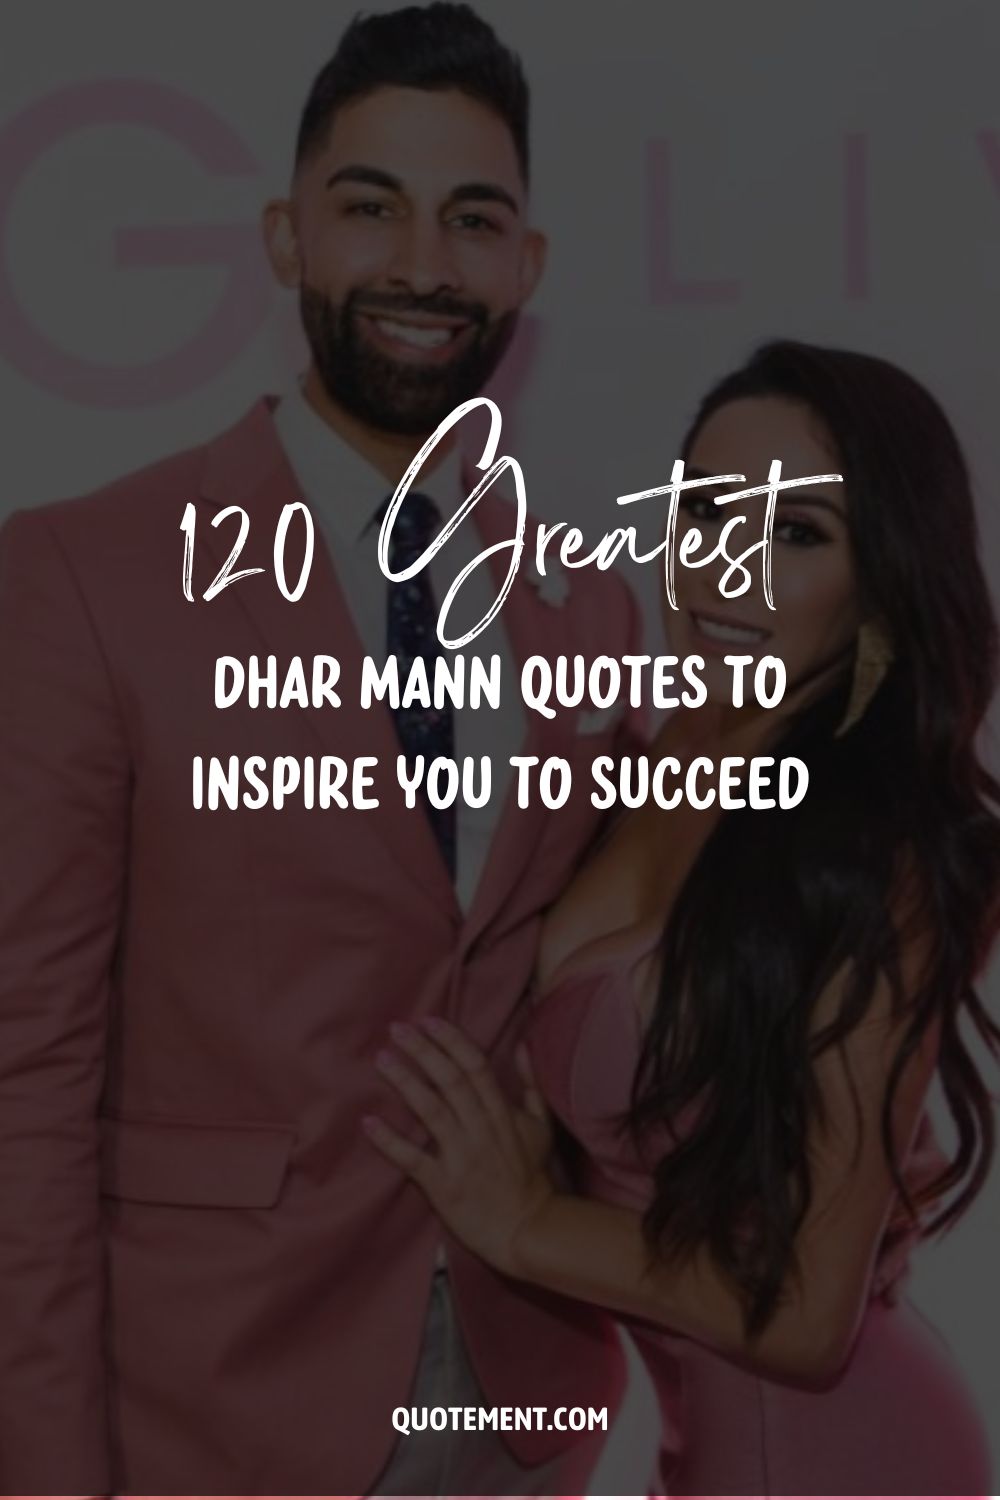 120 Greatest Dhar Mann Quotes To Inspire You To Succeed
